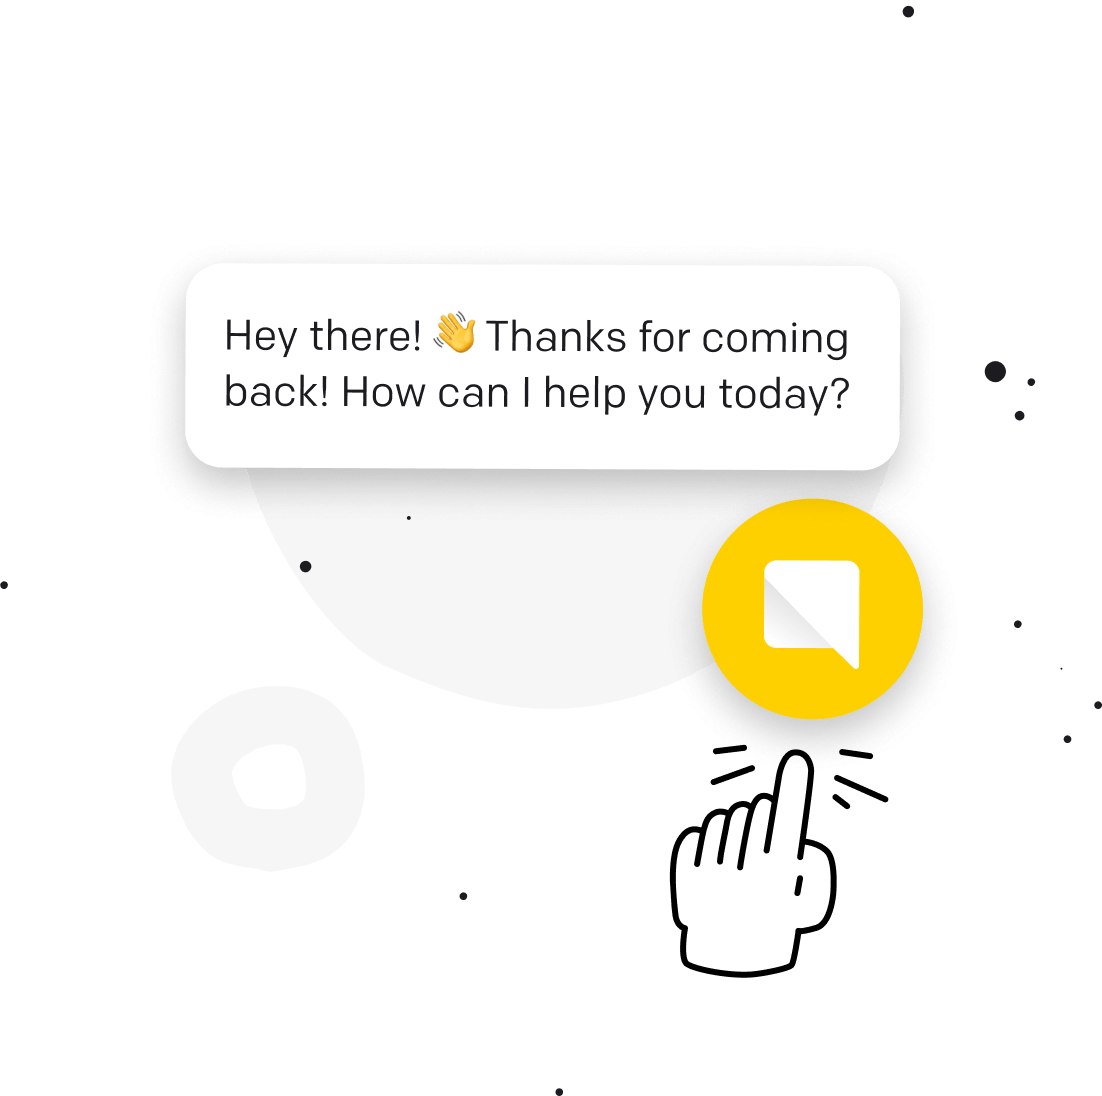 Engage more users and promote special offers with chat bot